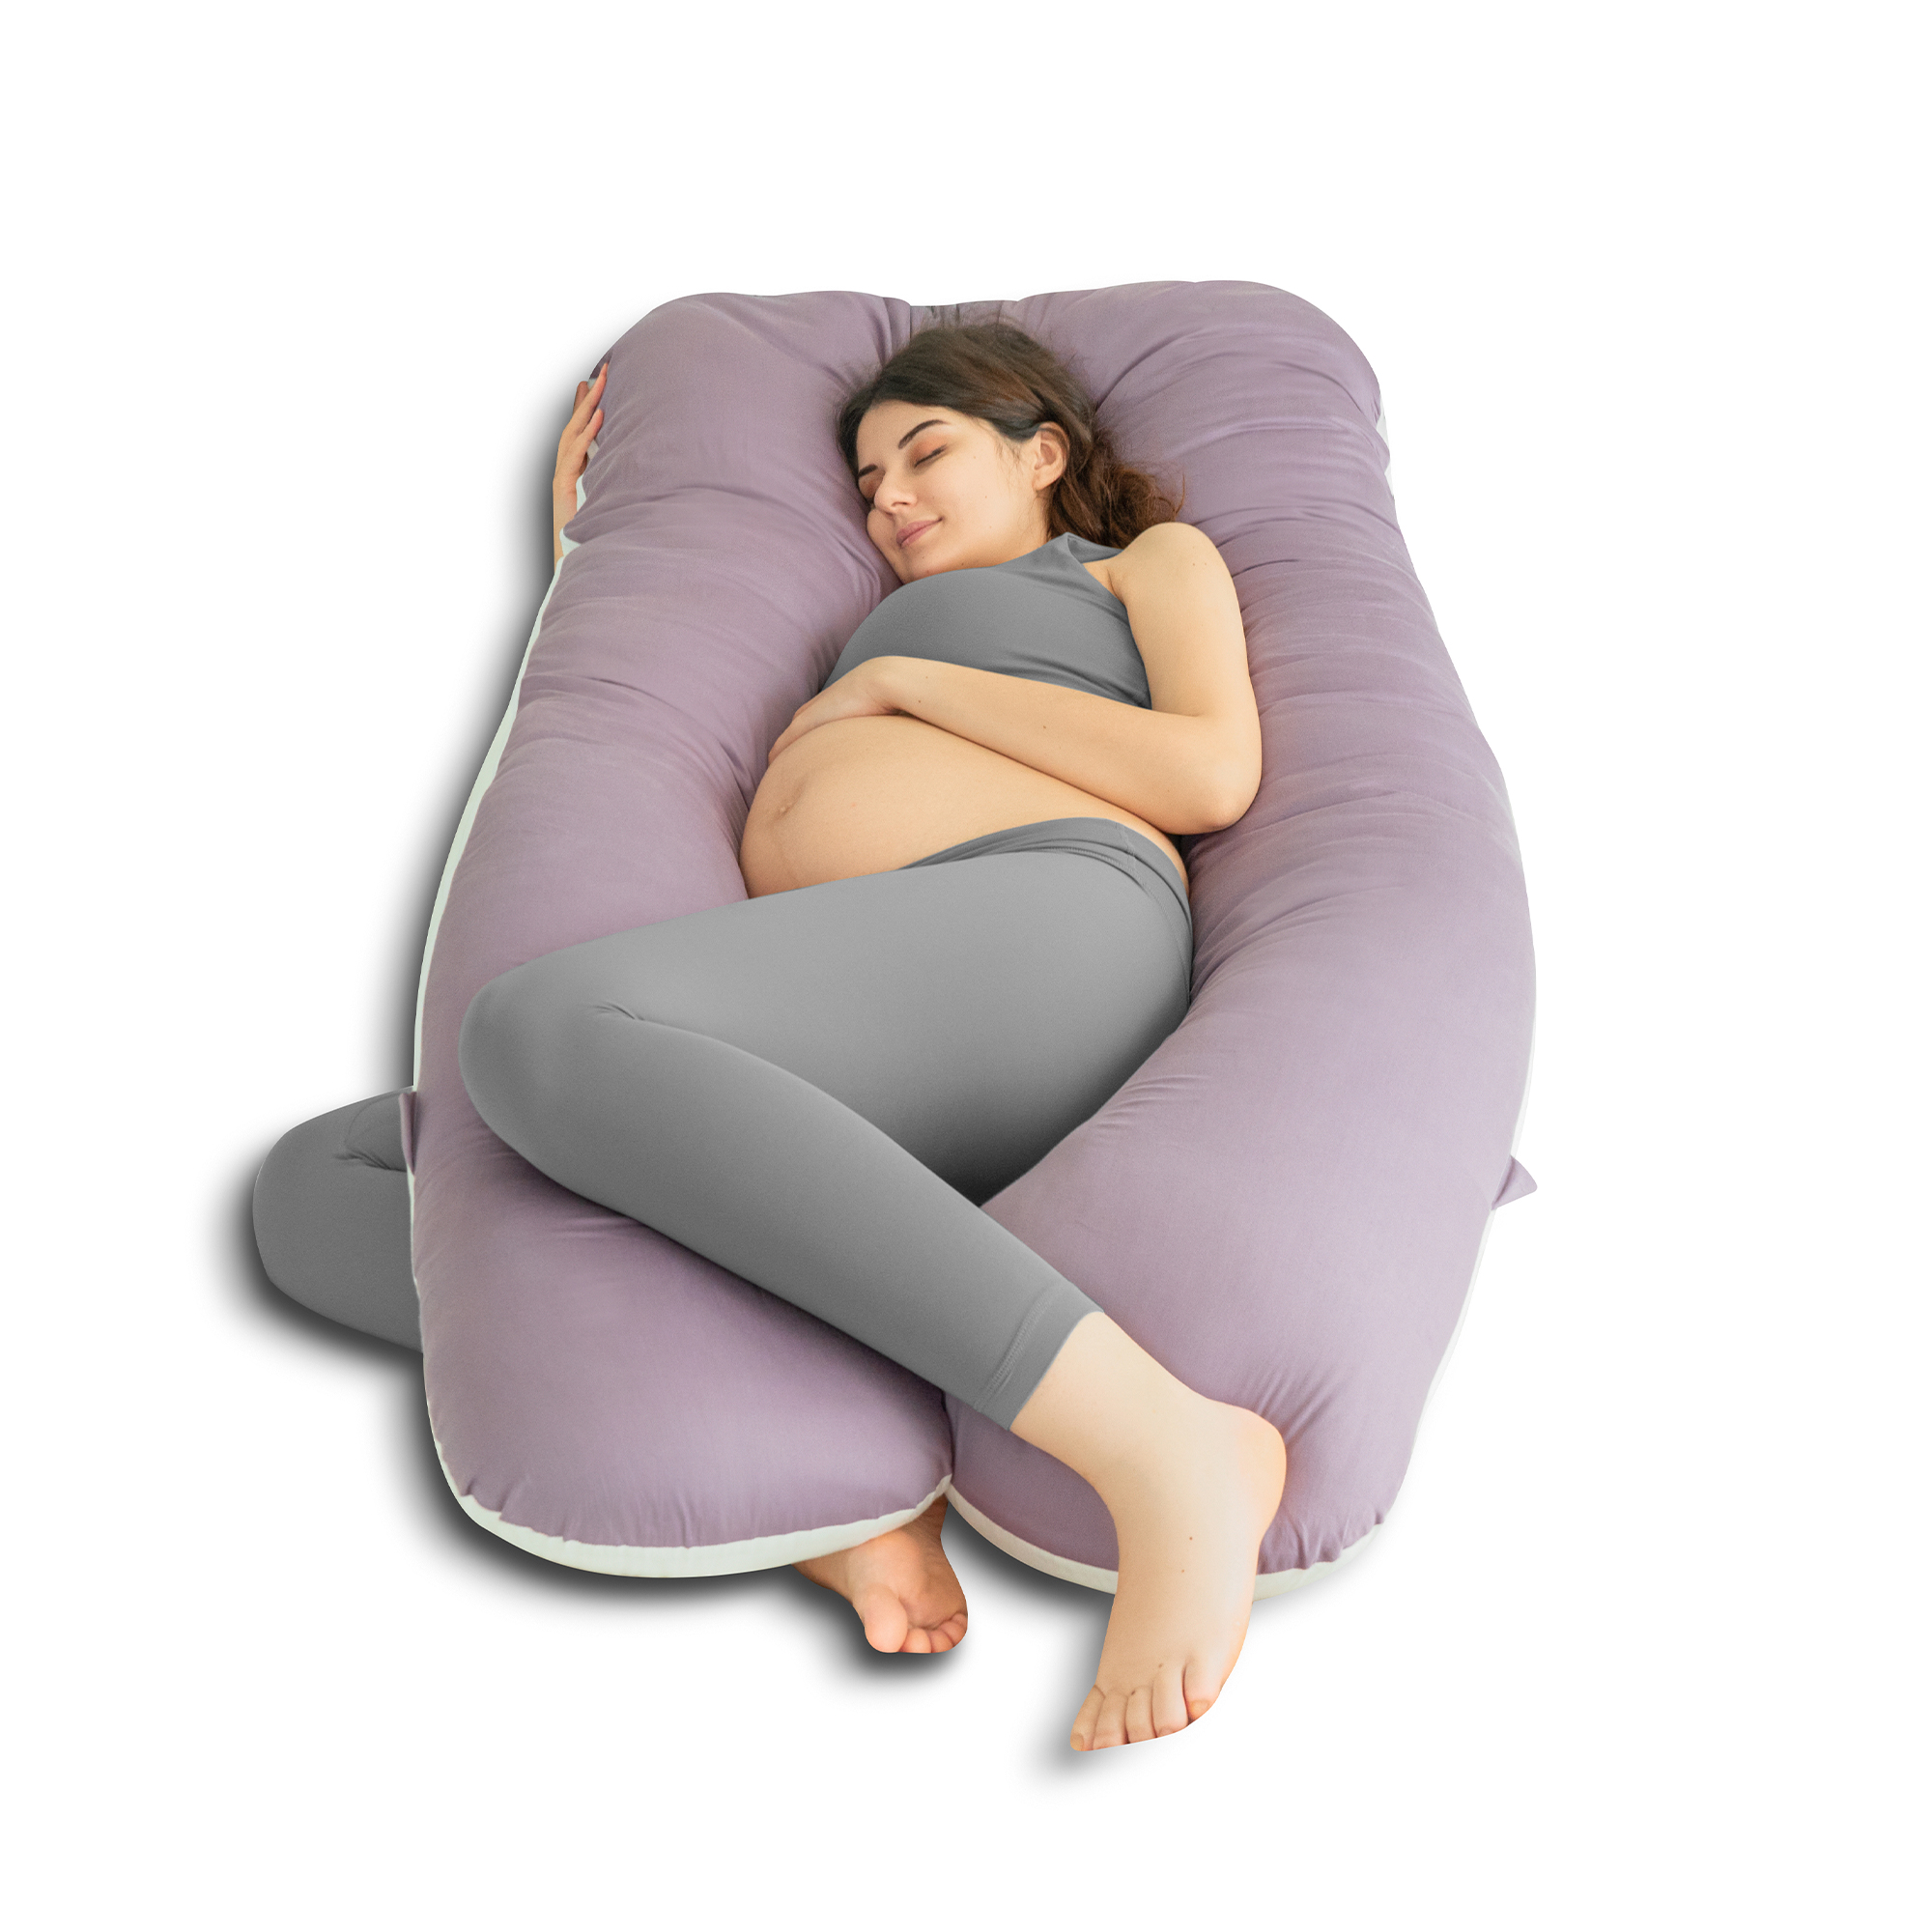 Gestational Pregnant Maternity Full Body Pillow Case U-Shaped Sleepers LC